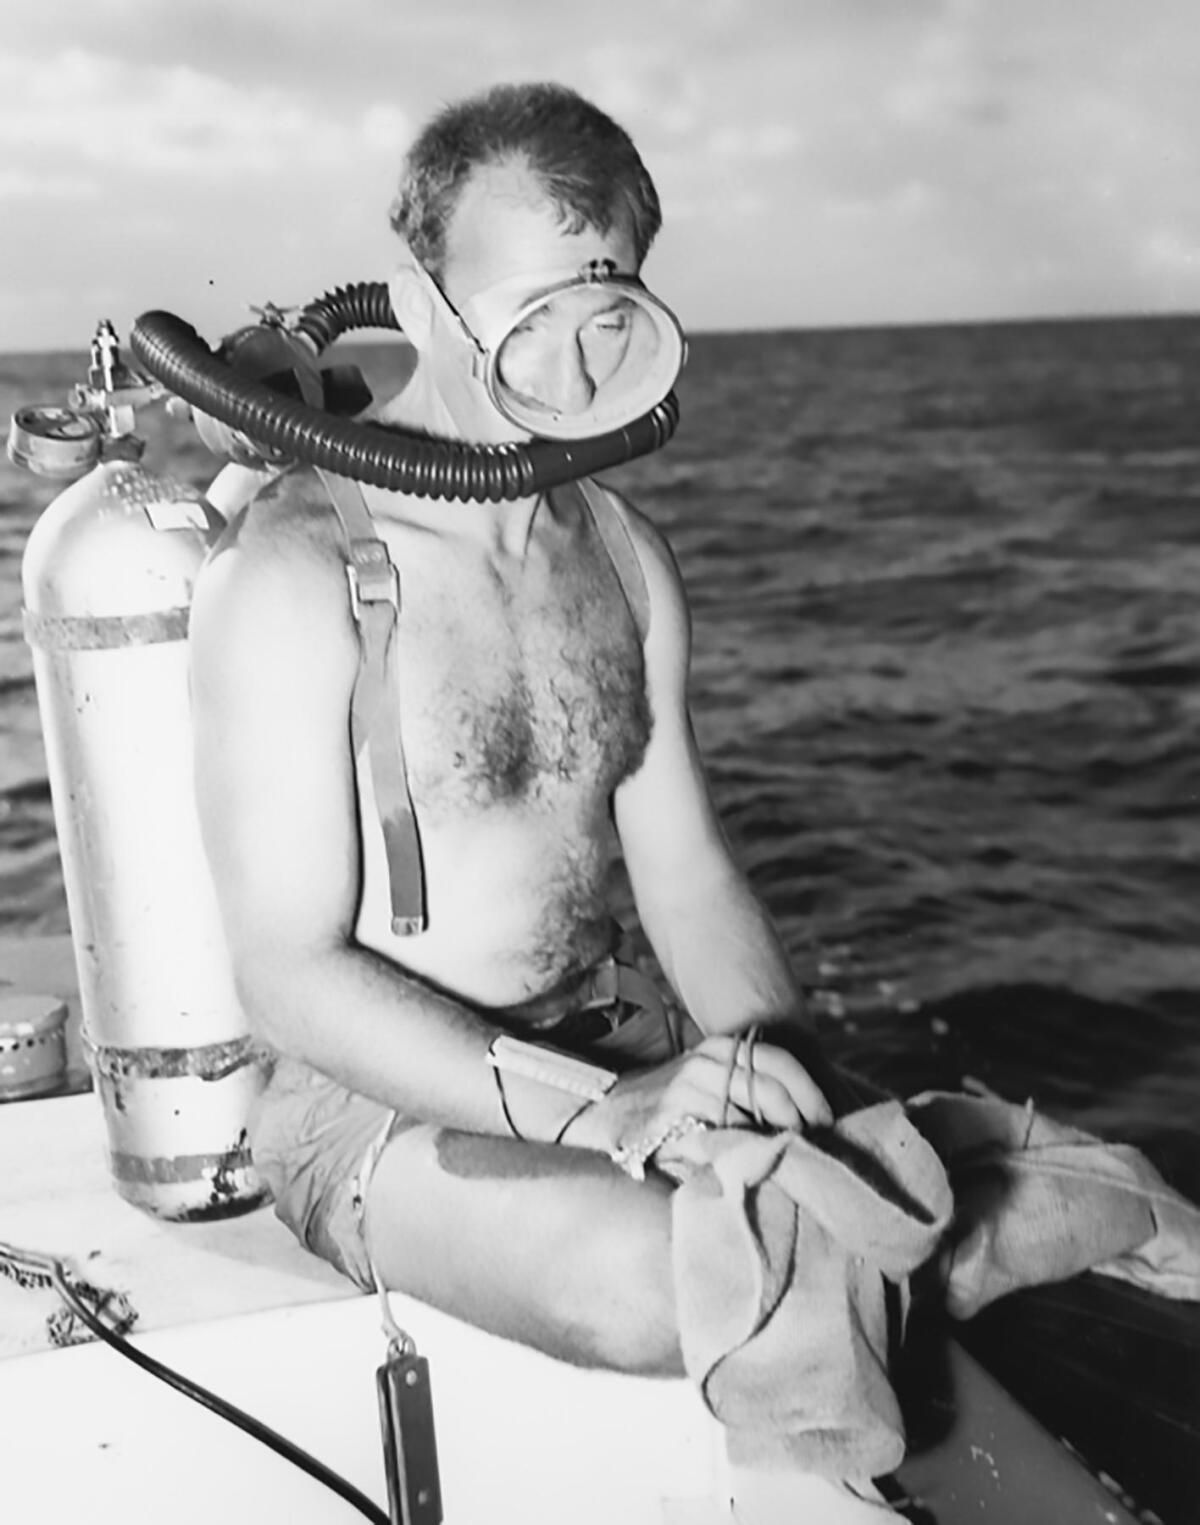 Walter Munk at work in the South Pacific, Capricorn Expedition. (1952)